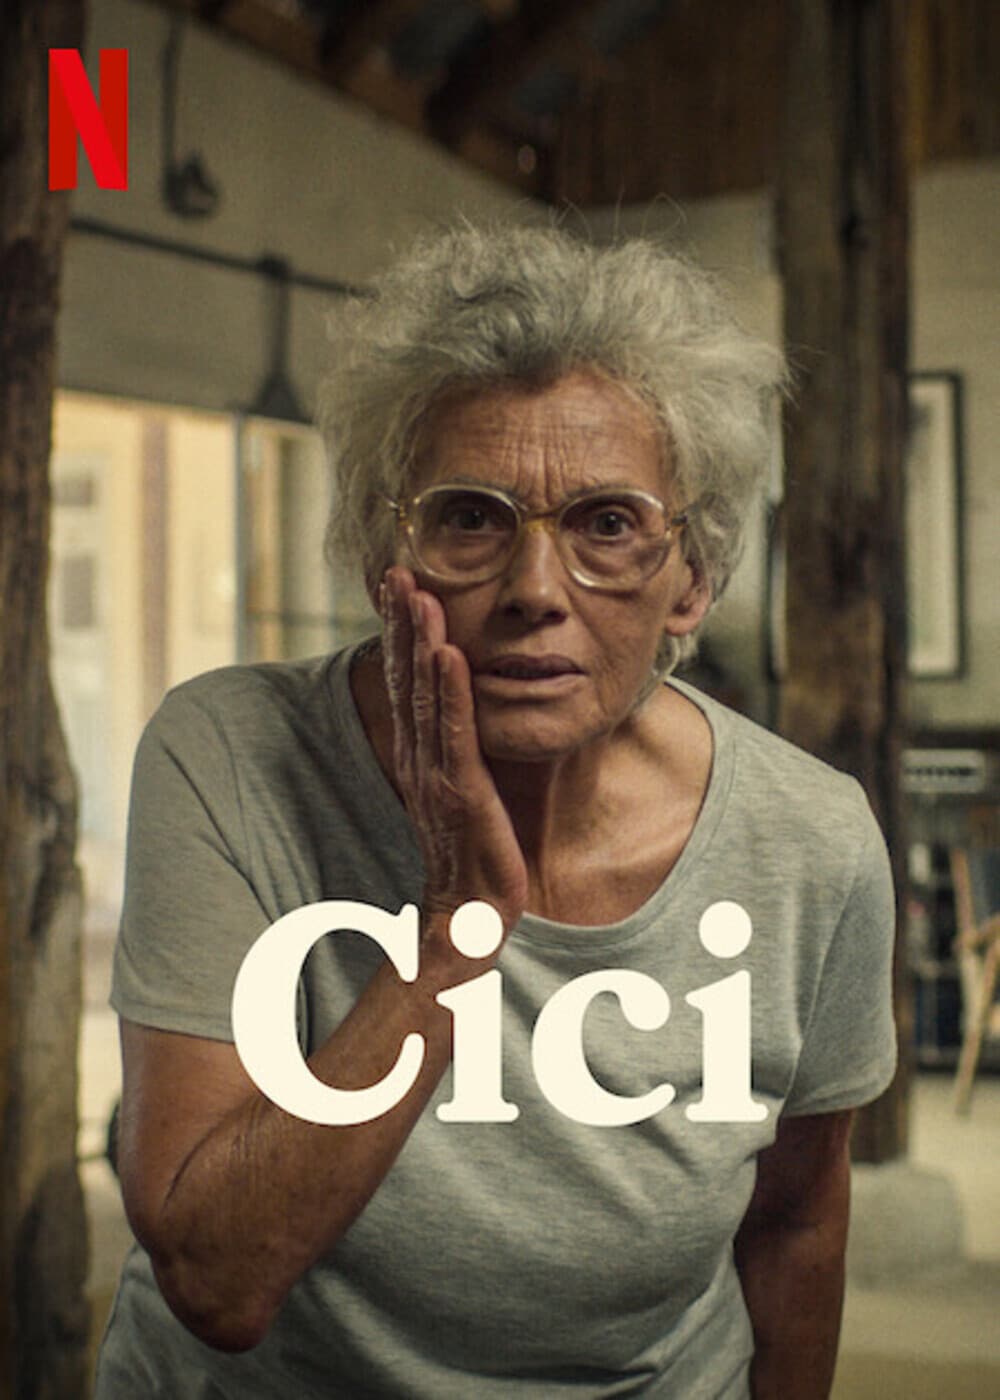 Cici Movie 2022, Official Trailer, Release Date